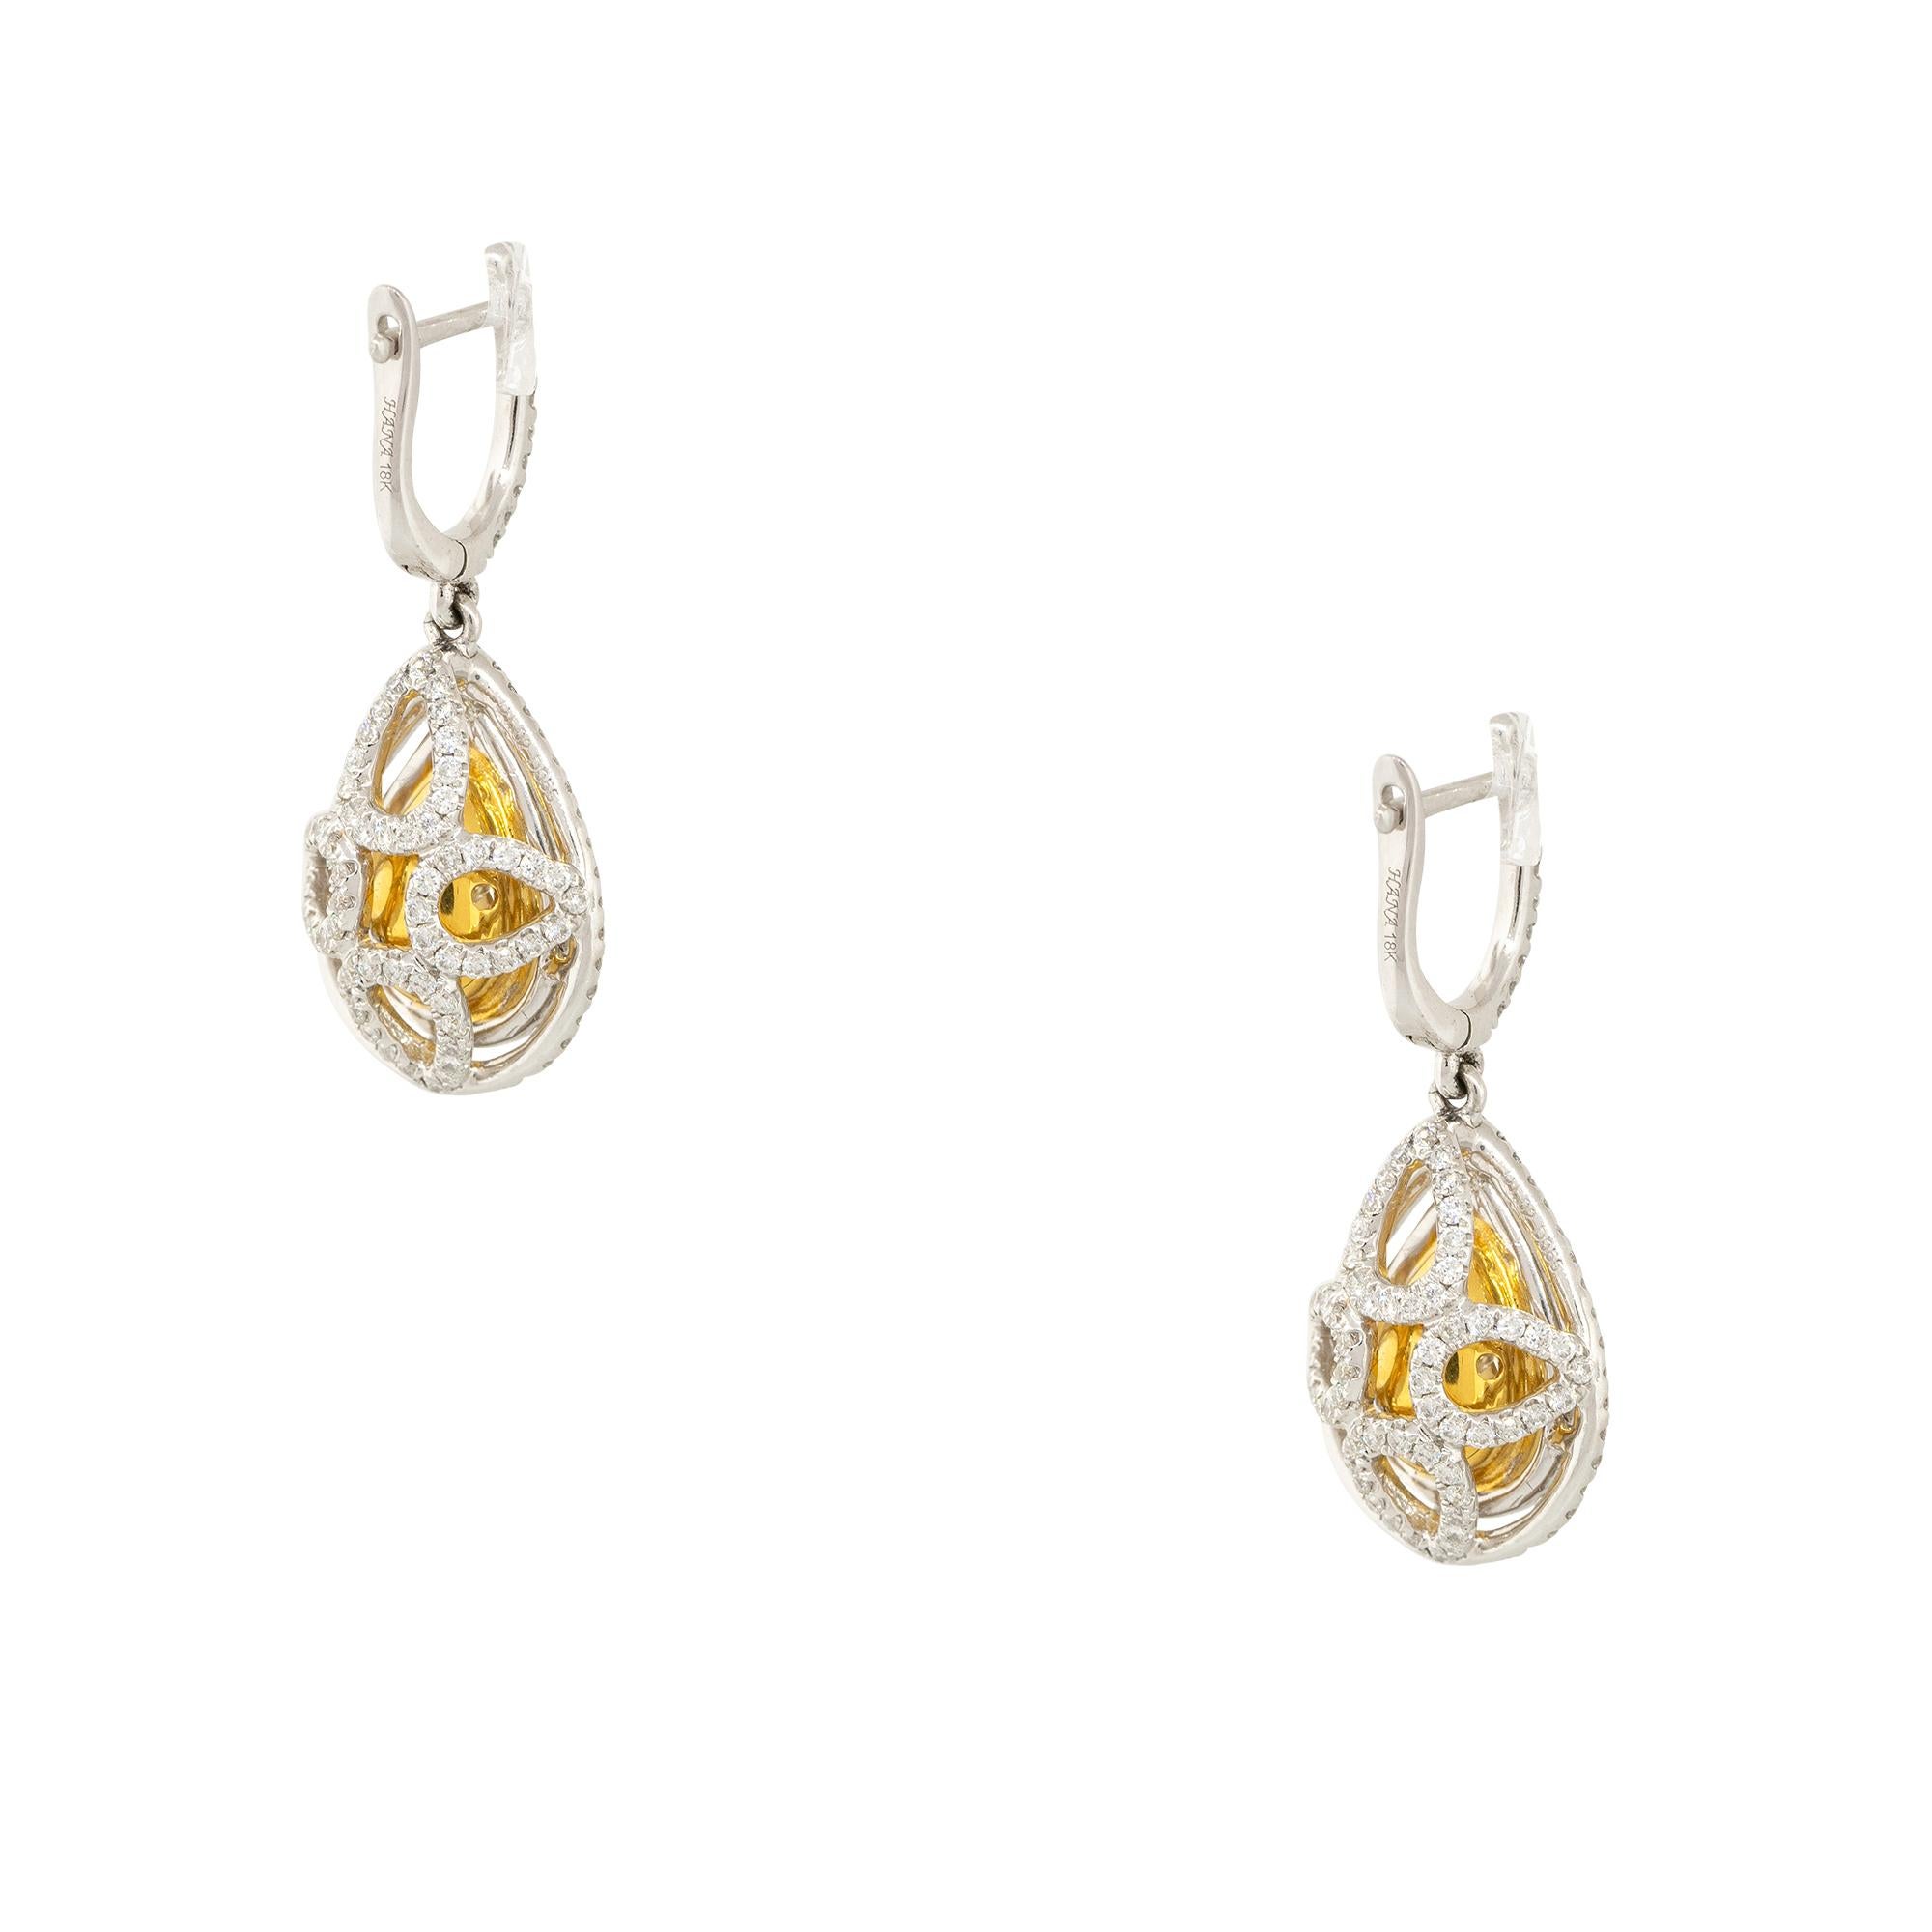 3.43 Carat Pear Shaped Yellow Diamond Drop Earrings 18 Karat in Stock In Excellent Condition For Sale In Boca Raton, FL